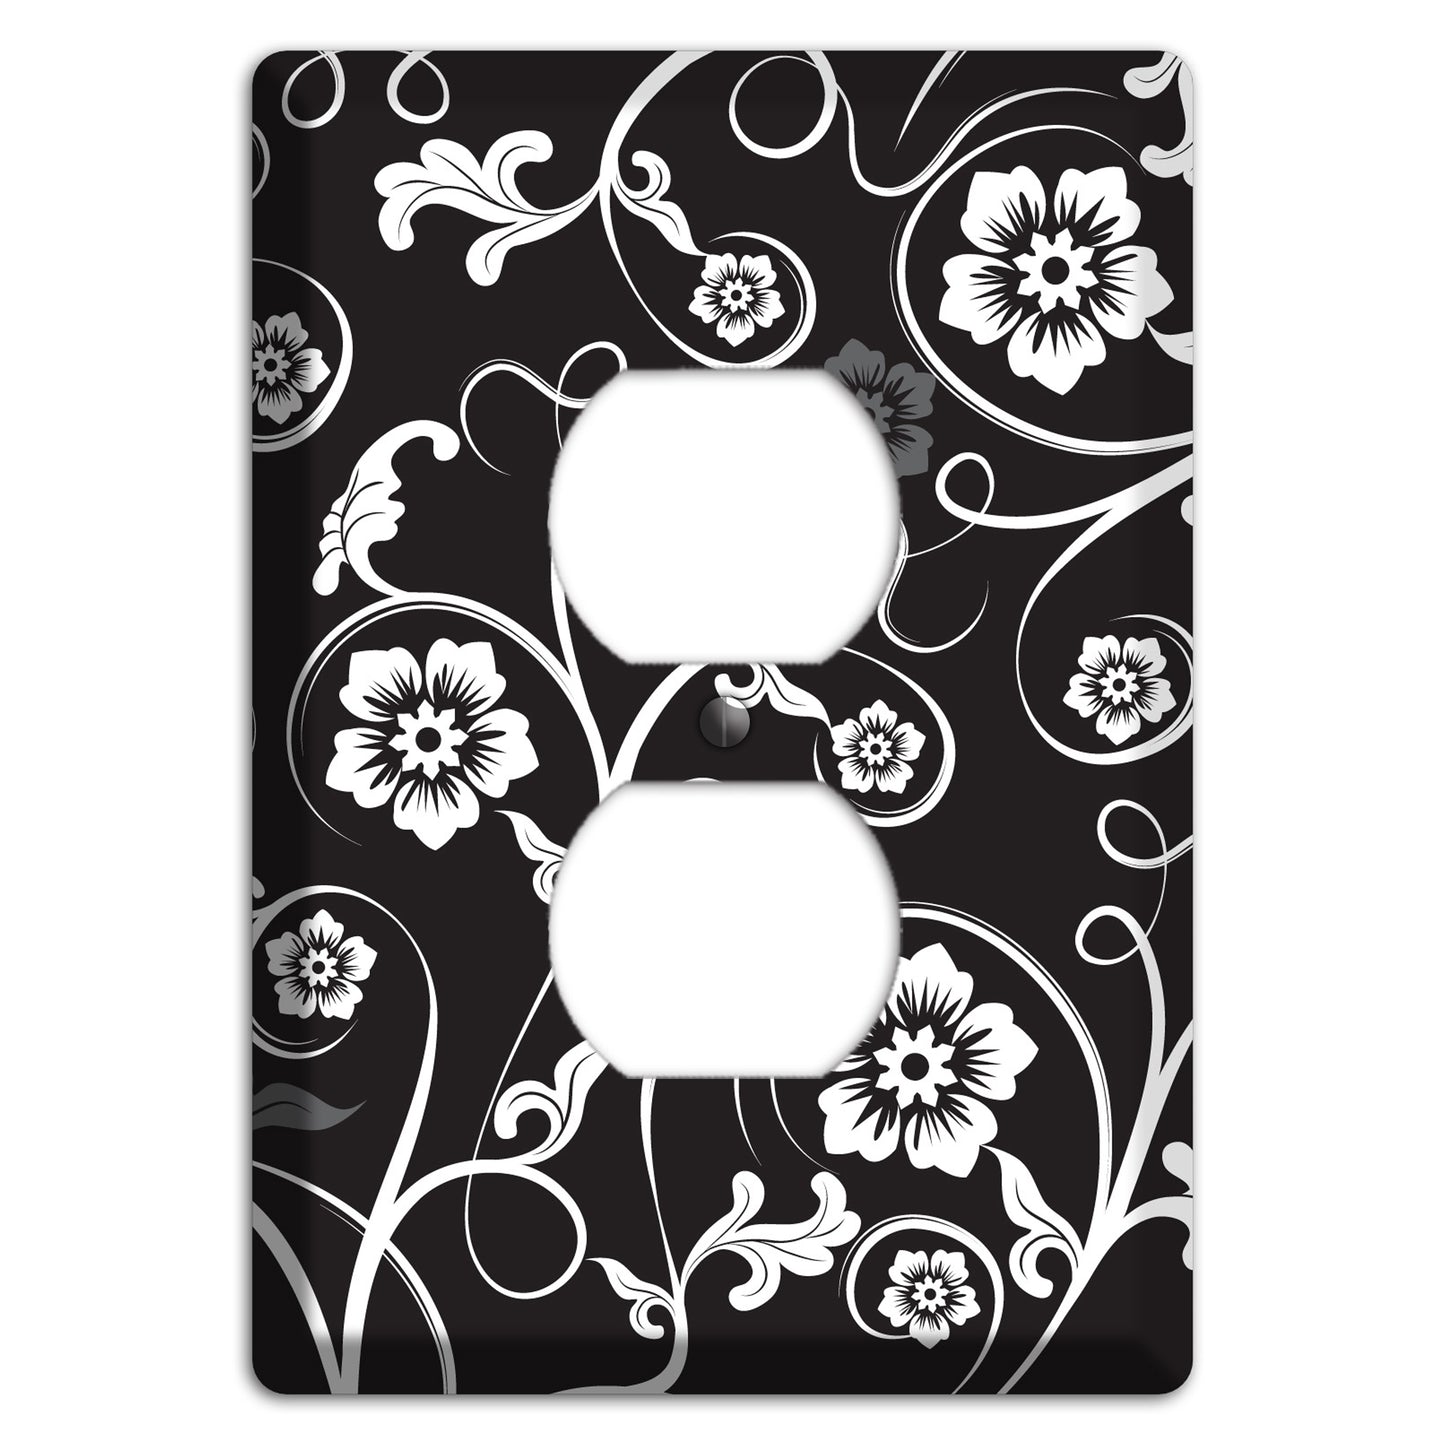 Black with White Flower Sprig Duplex Outlet Wallplate